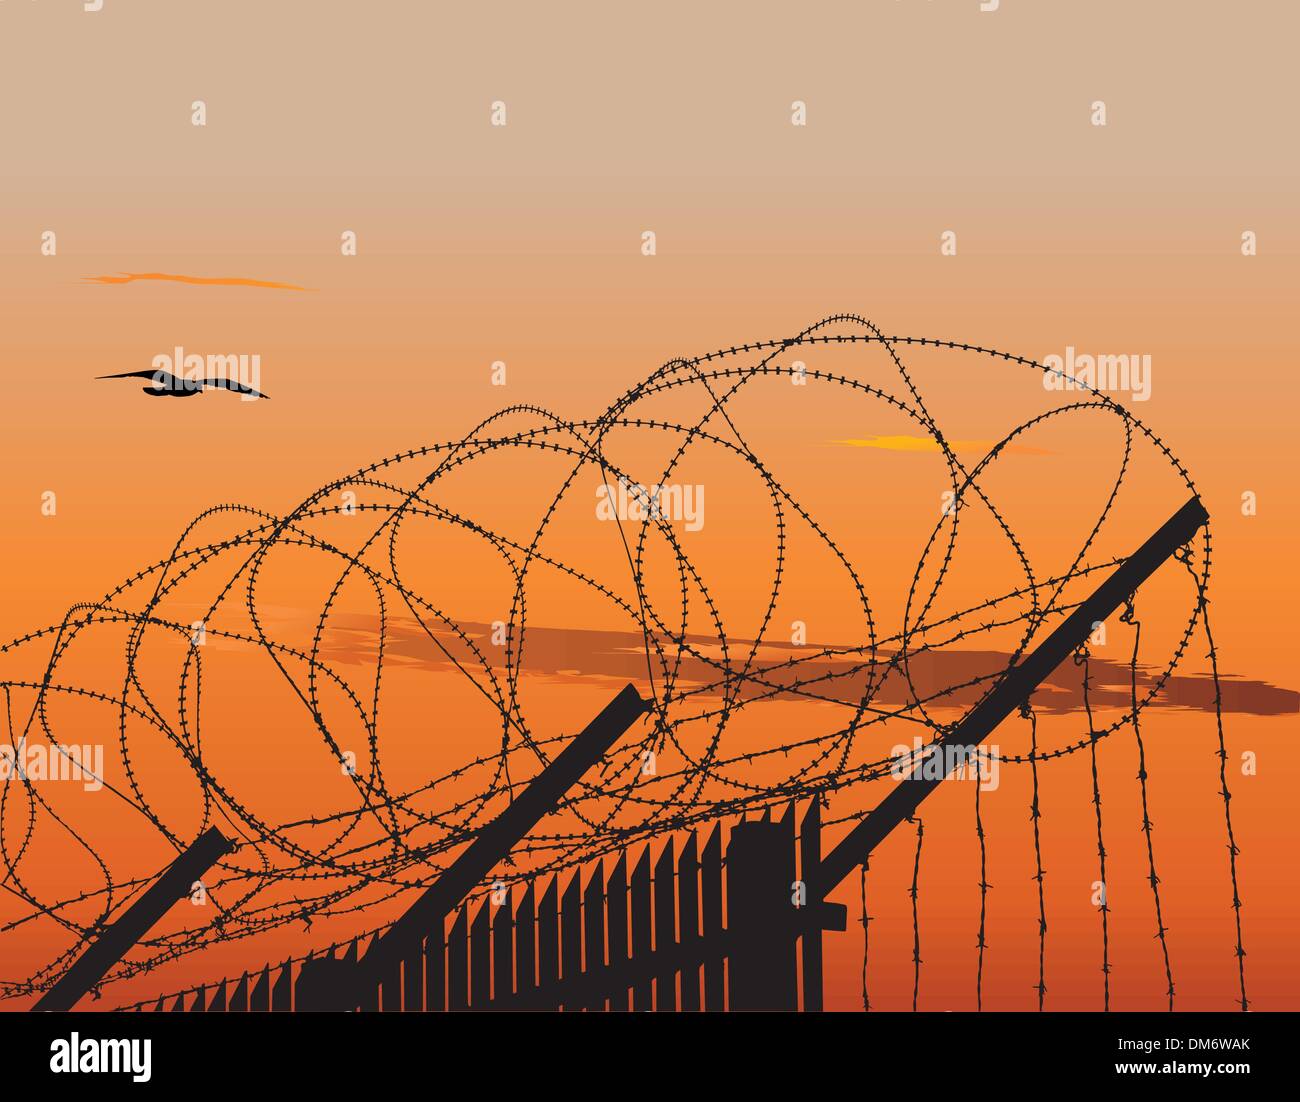 Fence with barbed wire Stock Vector